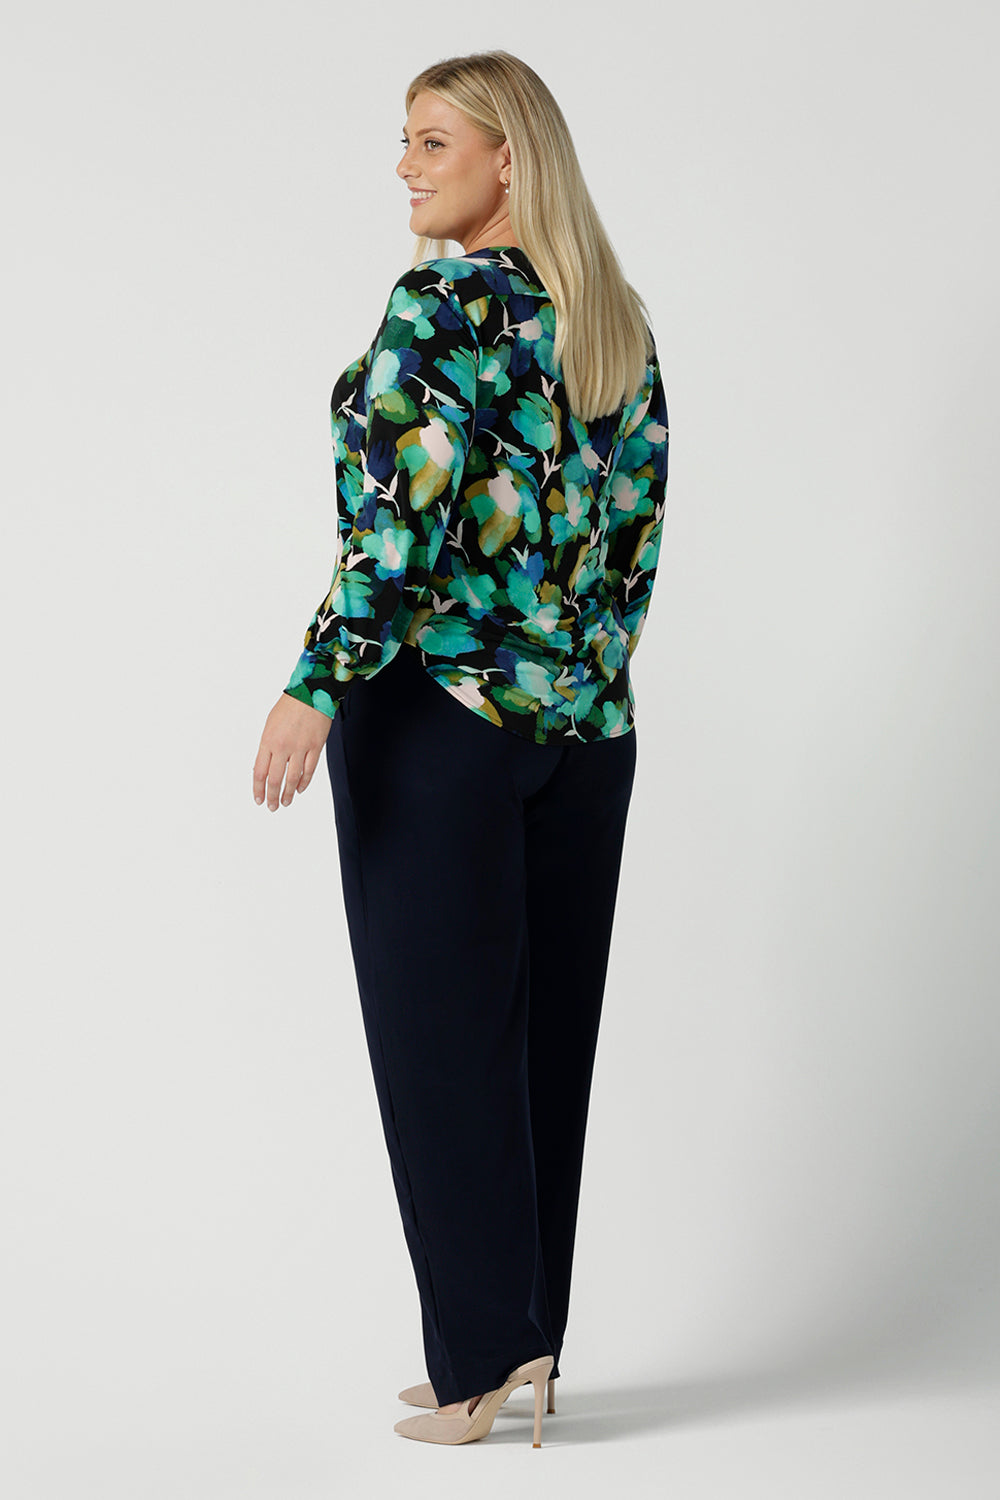 Back view of a size 18 woman wears the Jasper top in Canopy. A jersey style in a watercolour green print with balloon sleeves and cuff detail. Round neckline. Styled back with Navy Brooklyn pant in Navy. Made in Australia for women size 8 - 24.